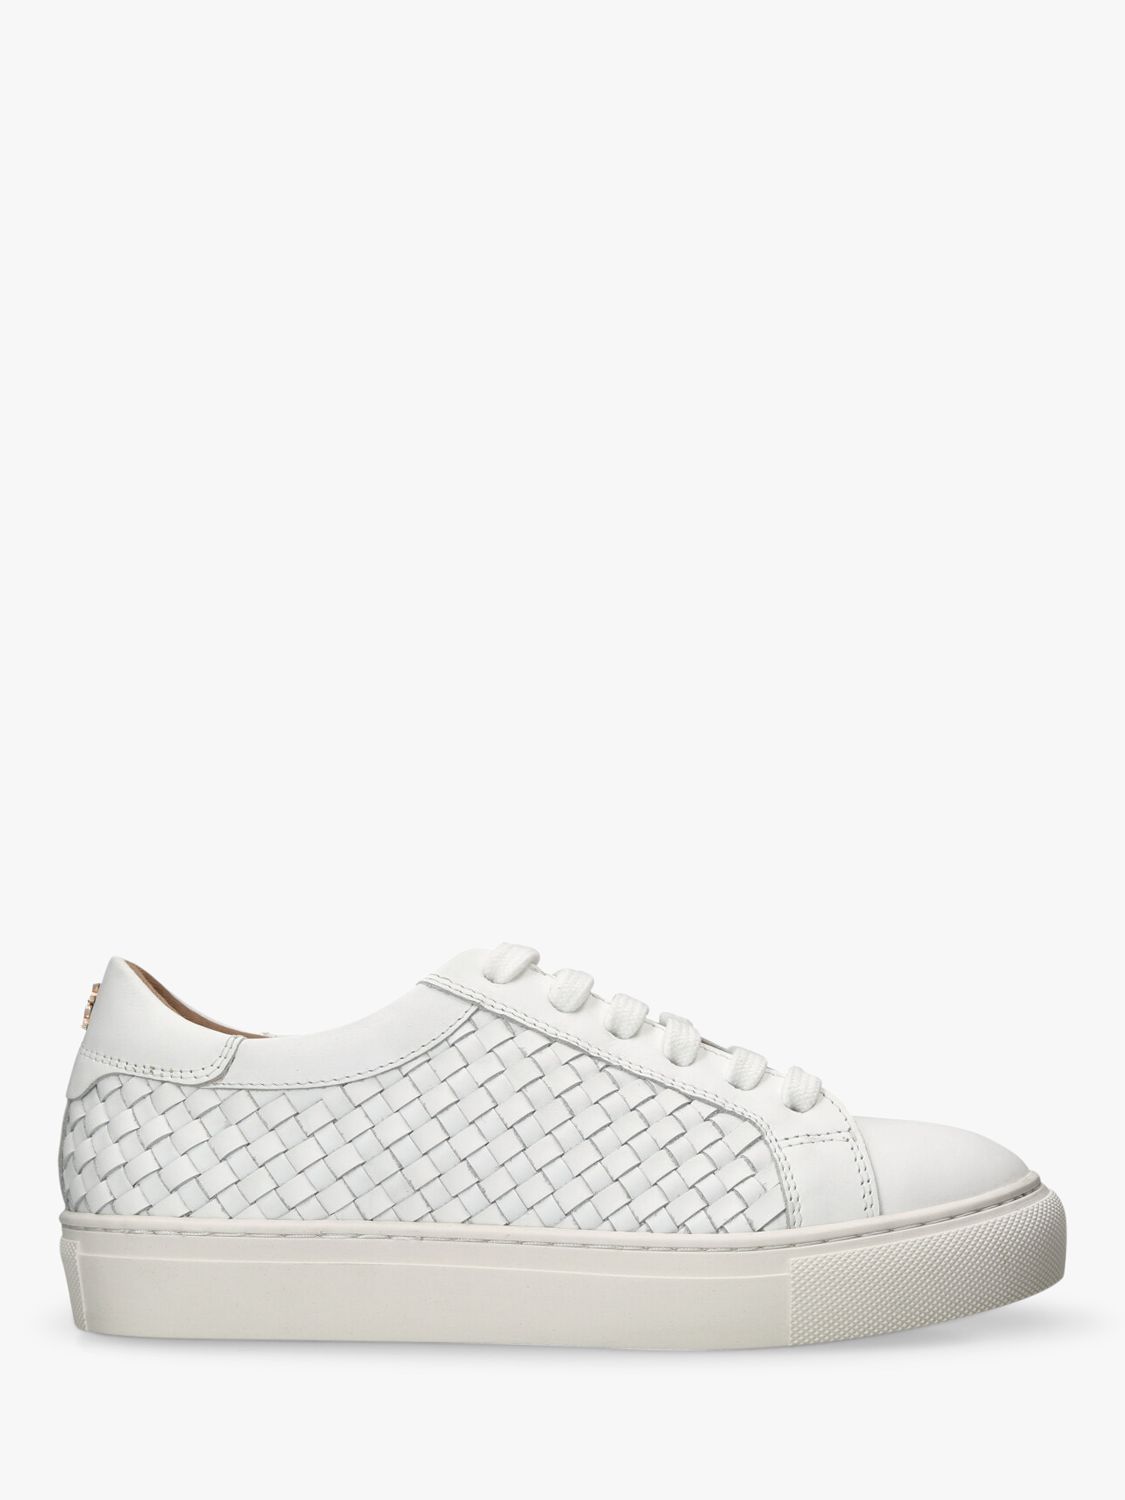 KG Kurt Geiger Dulwich Leather Weave Trainers, White at John Lewis ...